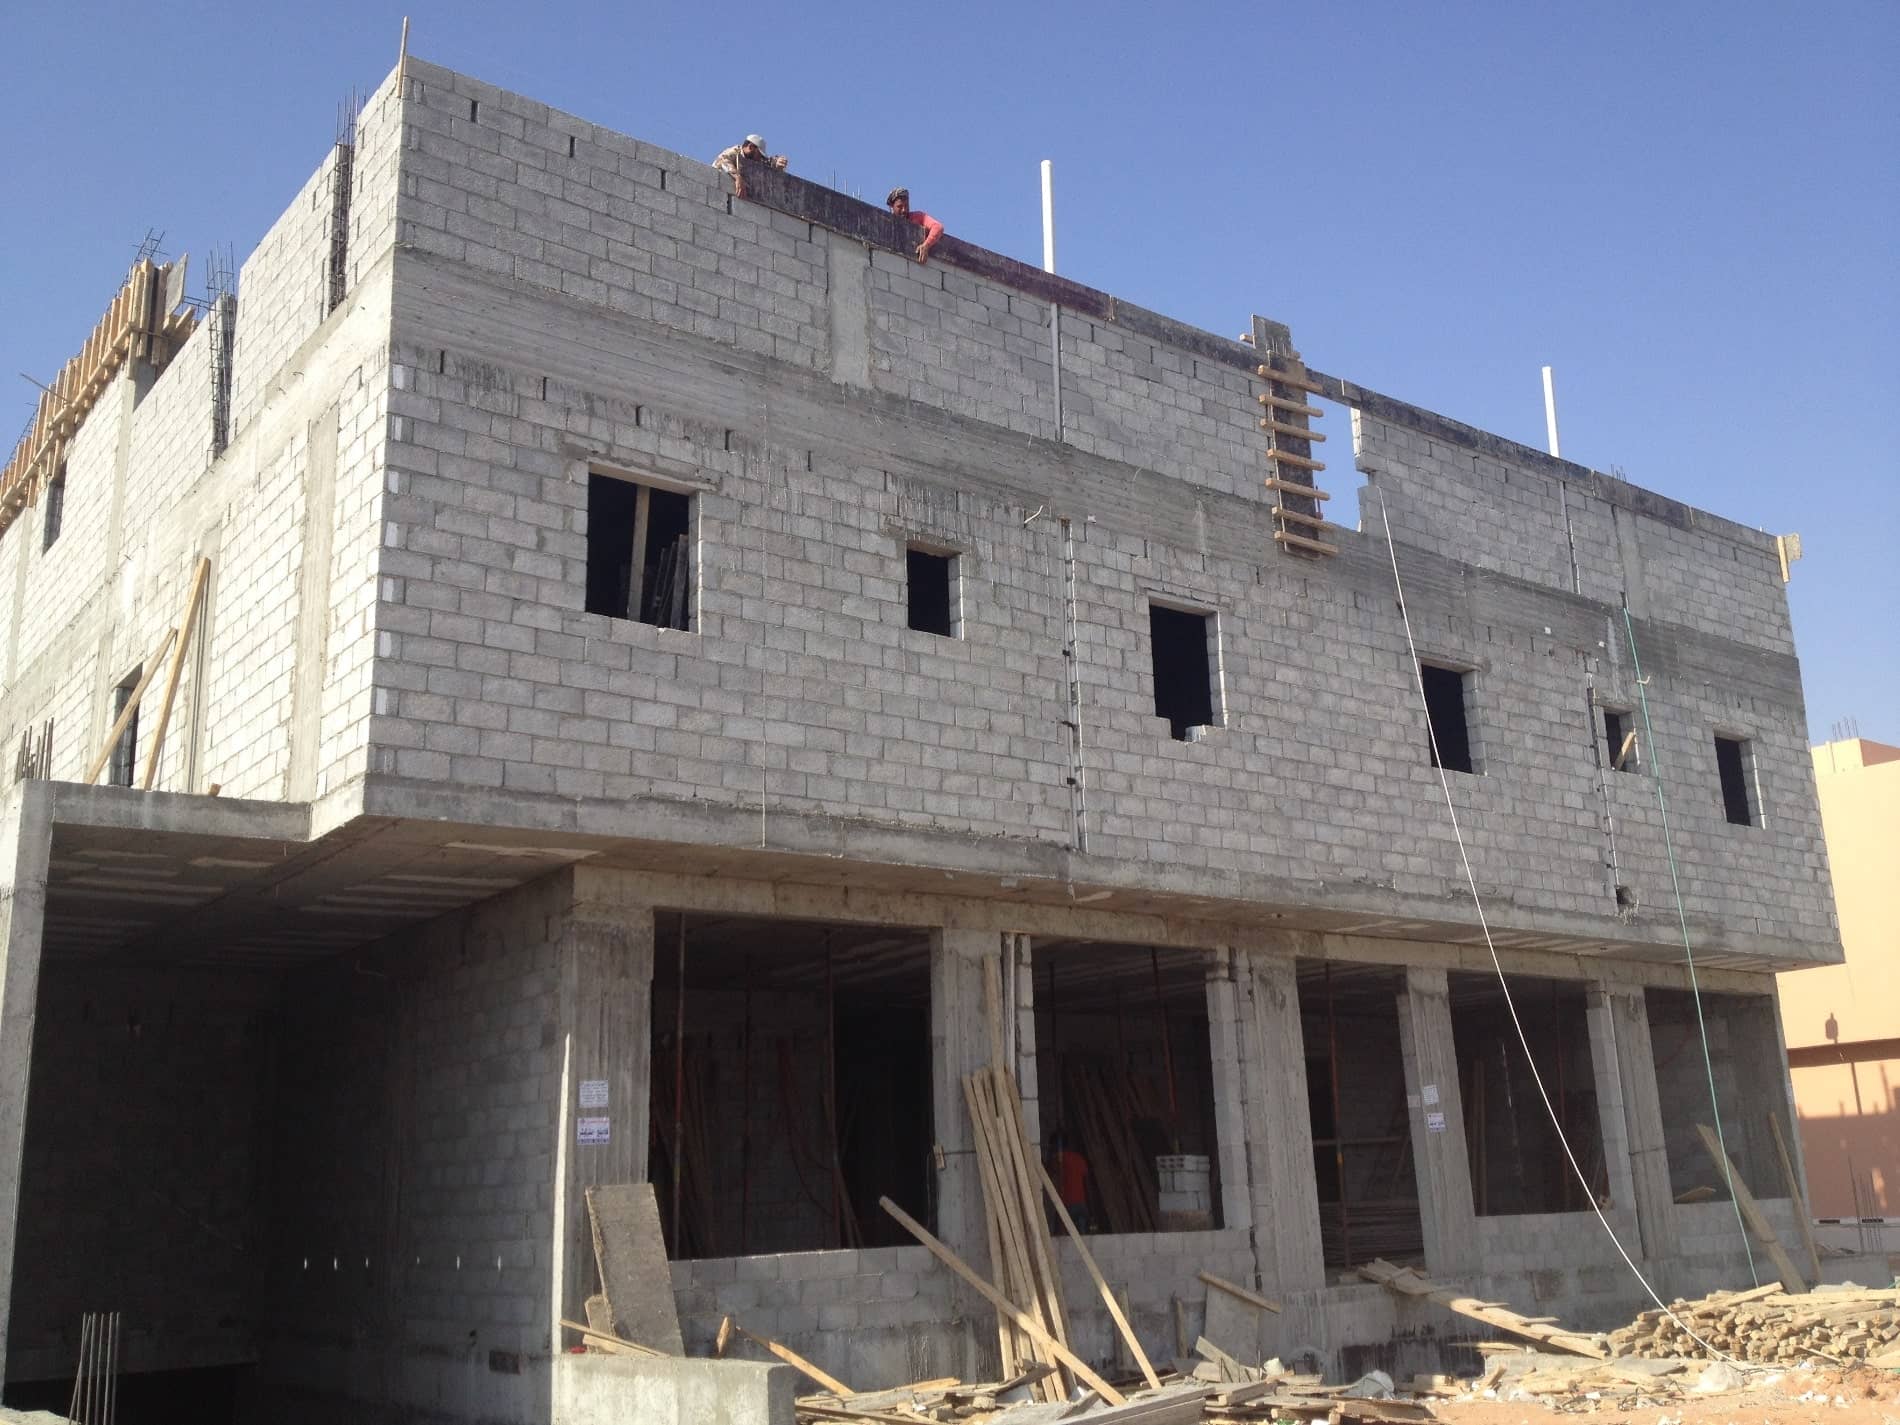 Internal and External Finishing Works for a Commercial Building in Yarmouk Area - Rawaj Alitaqan Consturcion Company in KSA